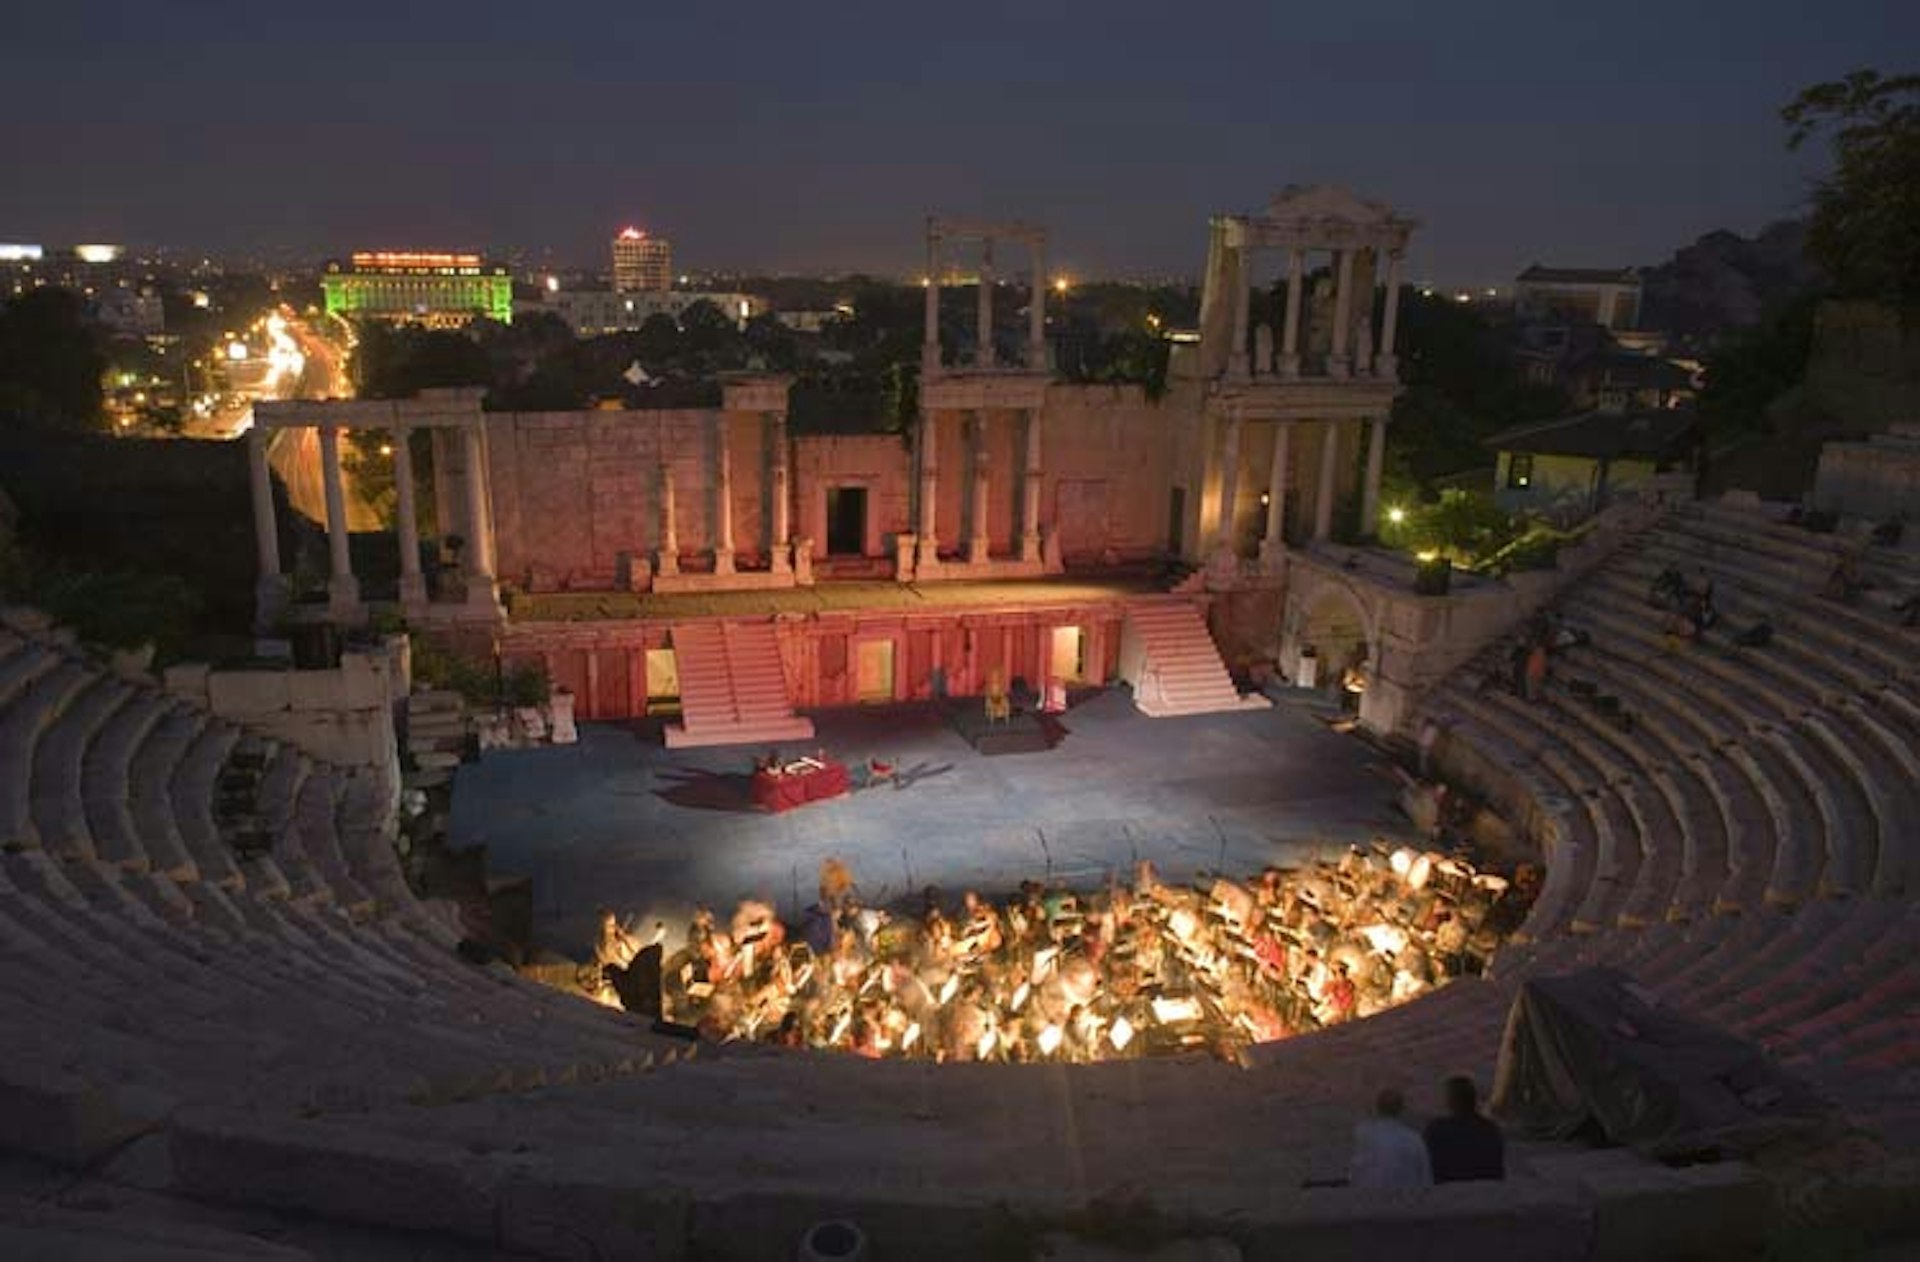 A performance lights up Plovdiv's amphitheatre as darkness falls. Image by De Agostini / W. Buss / Getty Images